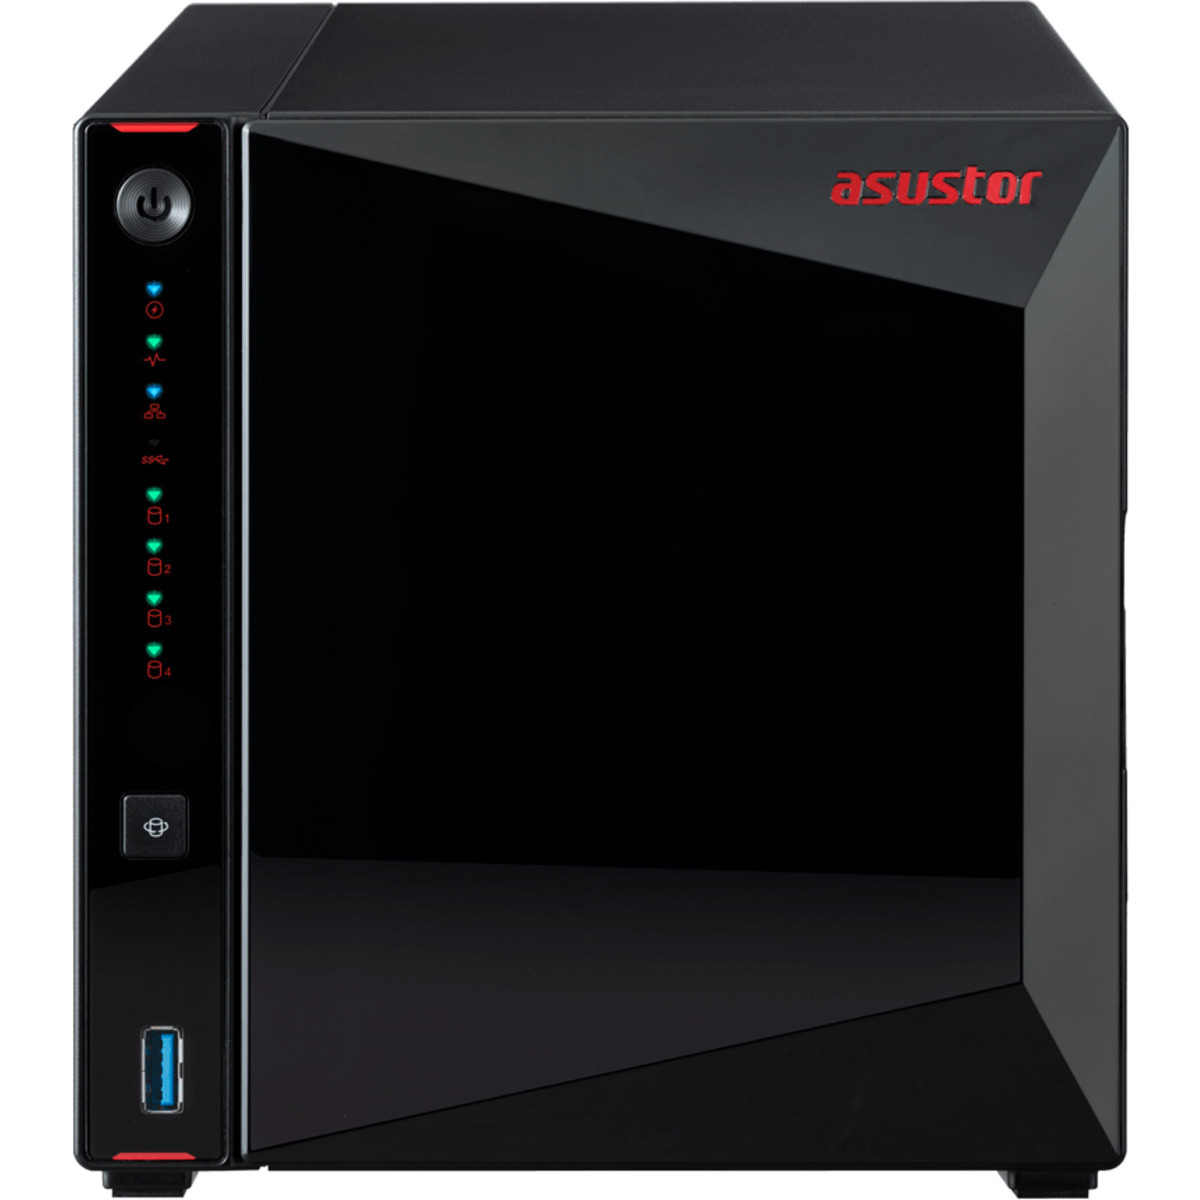 ASUSTOR AS5304T Nimbustor 72tb 4-Bay Desktop Multimedia / Power User / Business NAS - Network Attached Storage Device 4x18tb Seagate EXOS X18 ST18000NM000J 3.5 7200rpm SATA 6Gb/s HDD ENTERPRISE Class Drives Installed - Burn-In Tested - FREE RAM UPGRADE AS5304T Nimbustor